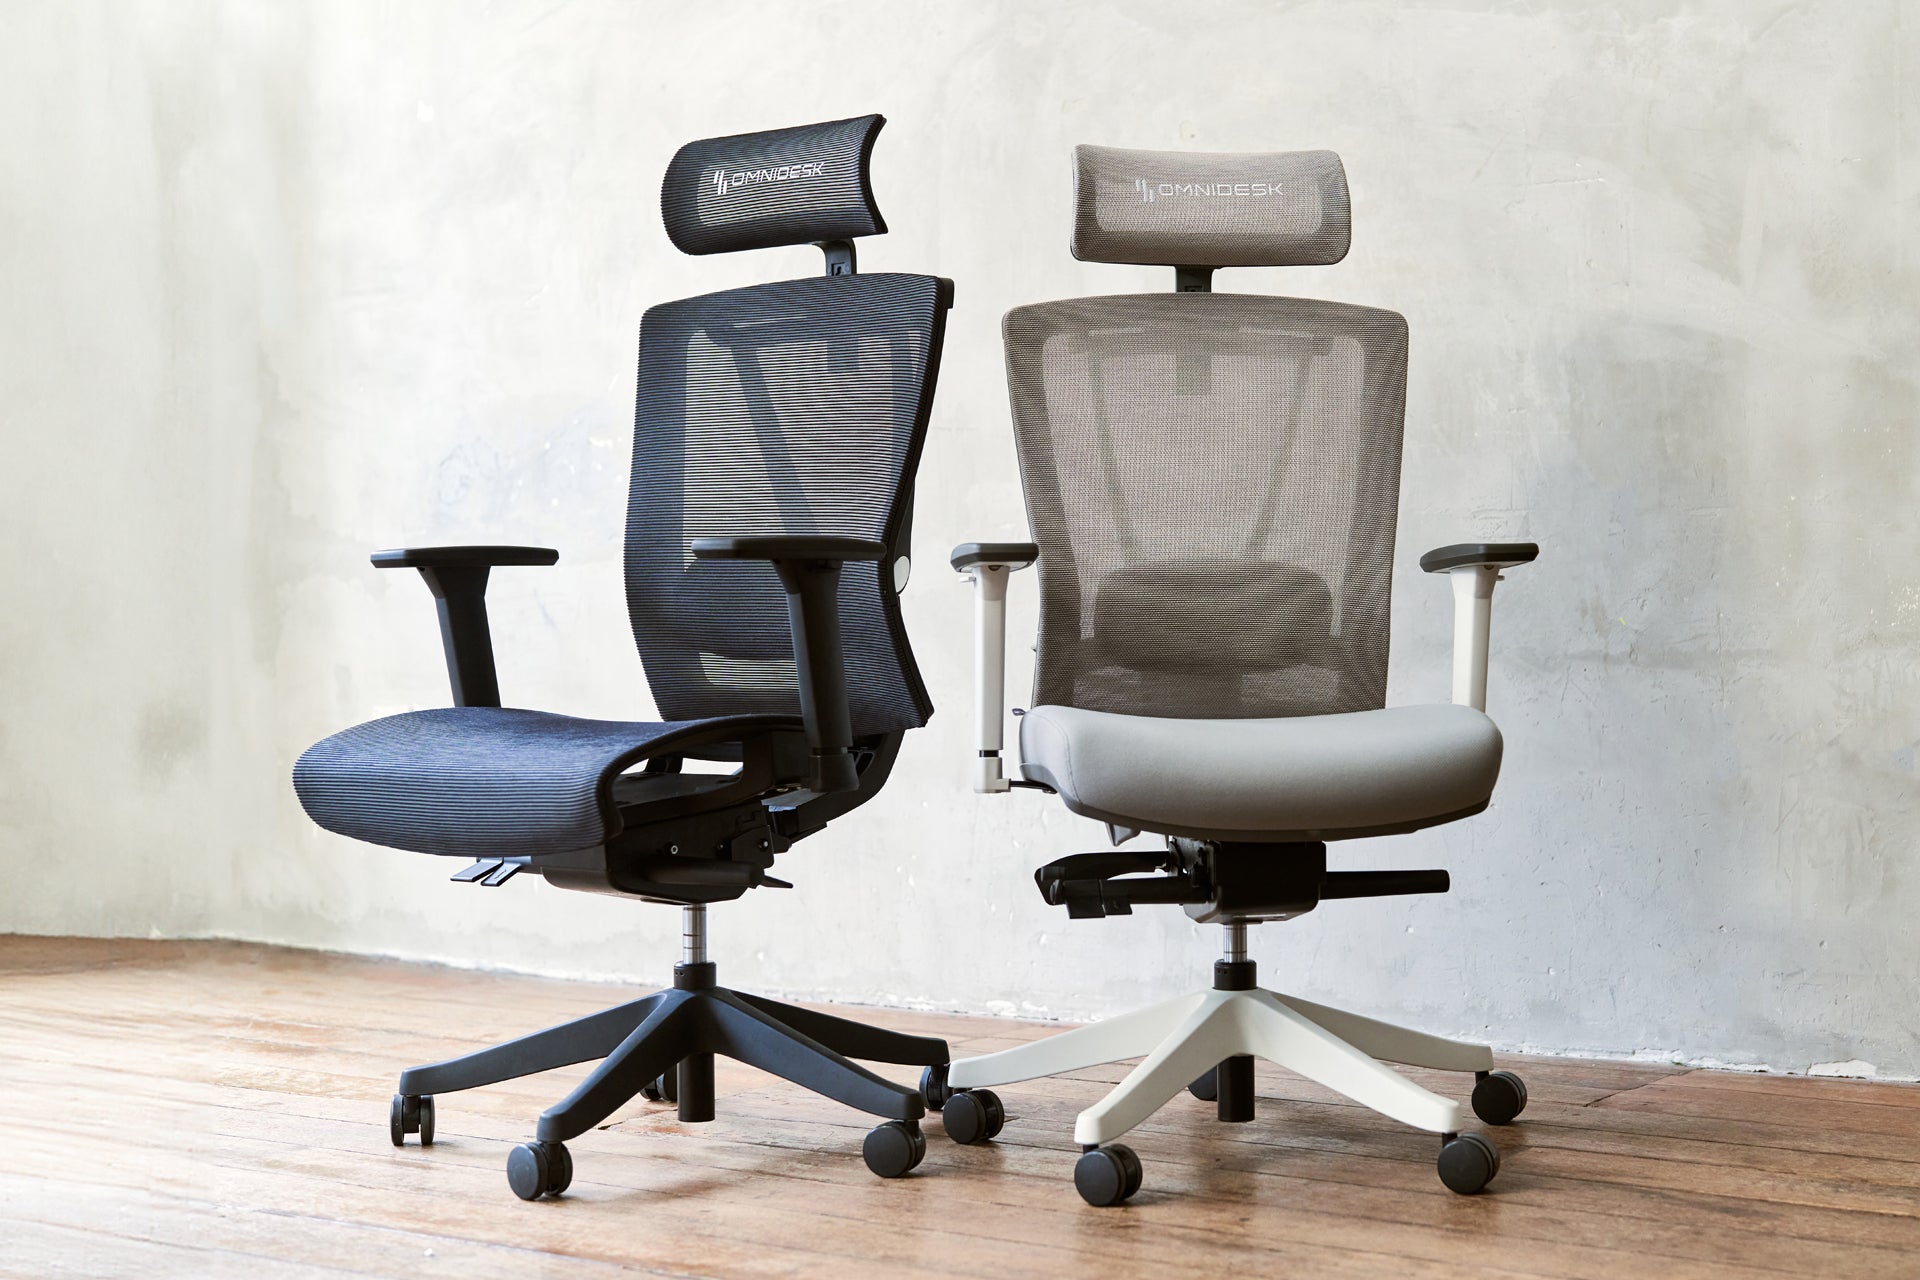 Office Chair Shopping Guide: 12 ergonomic adjustment points that matter